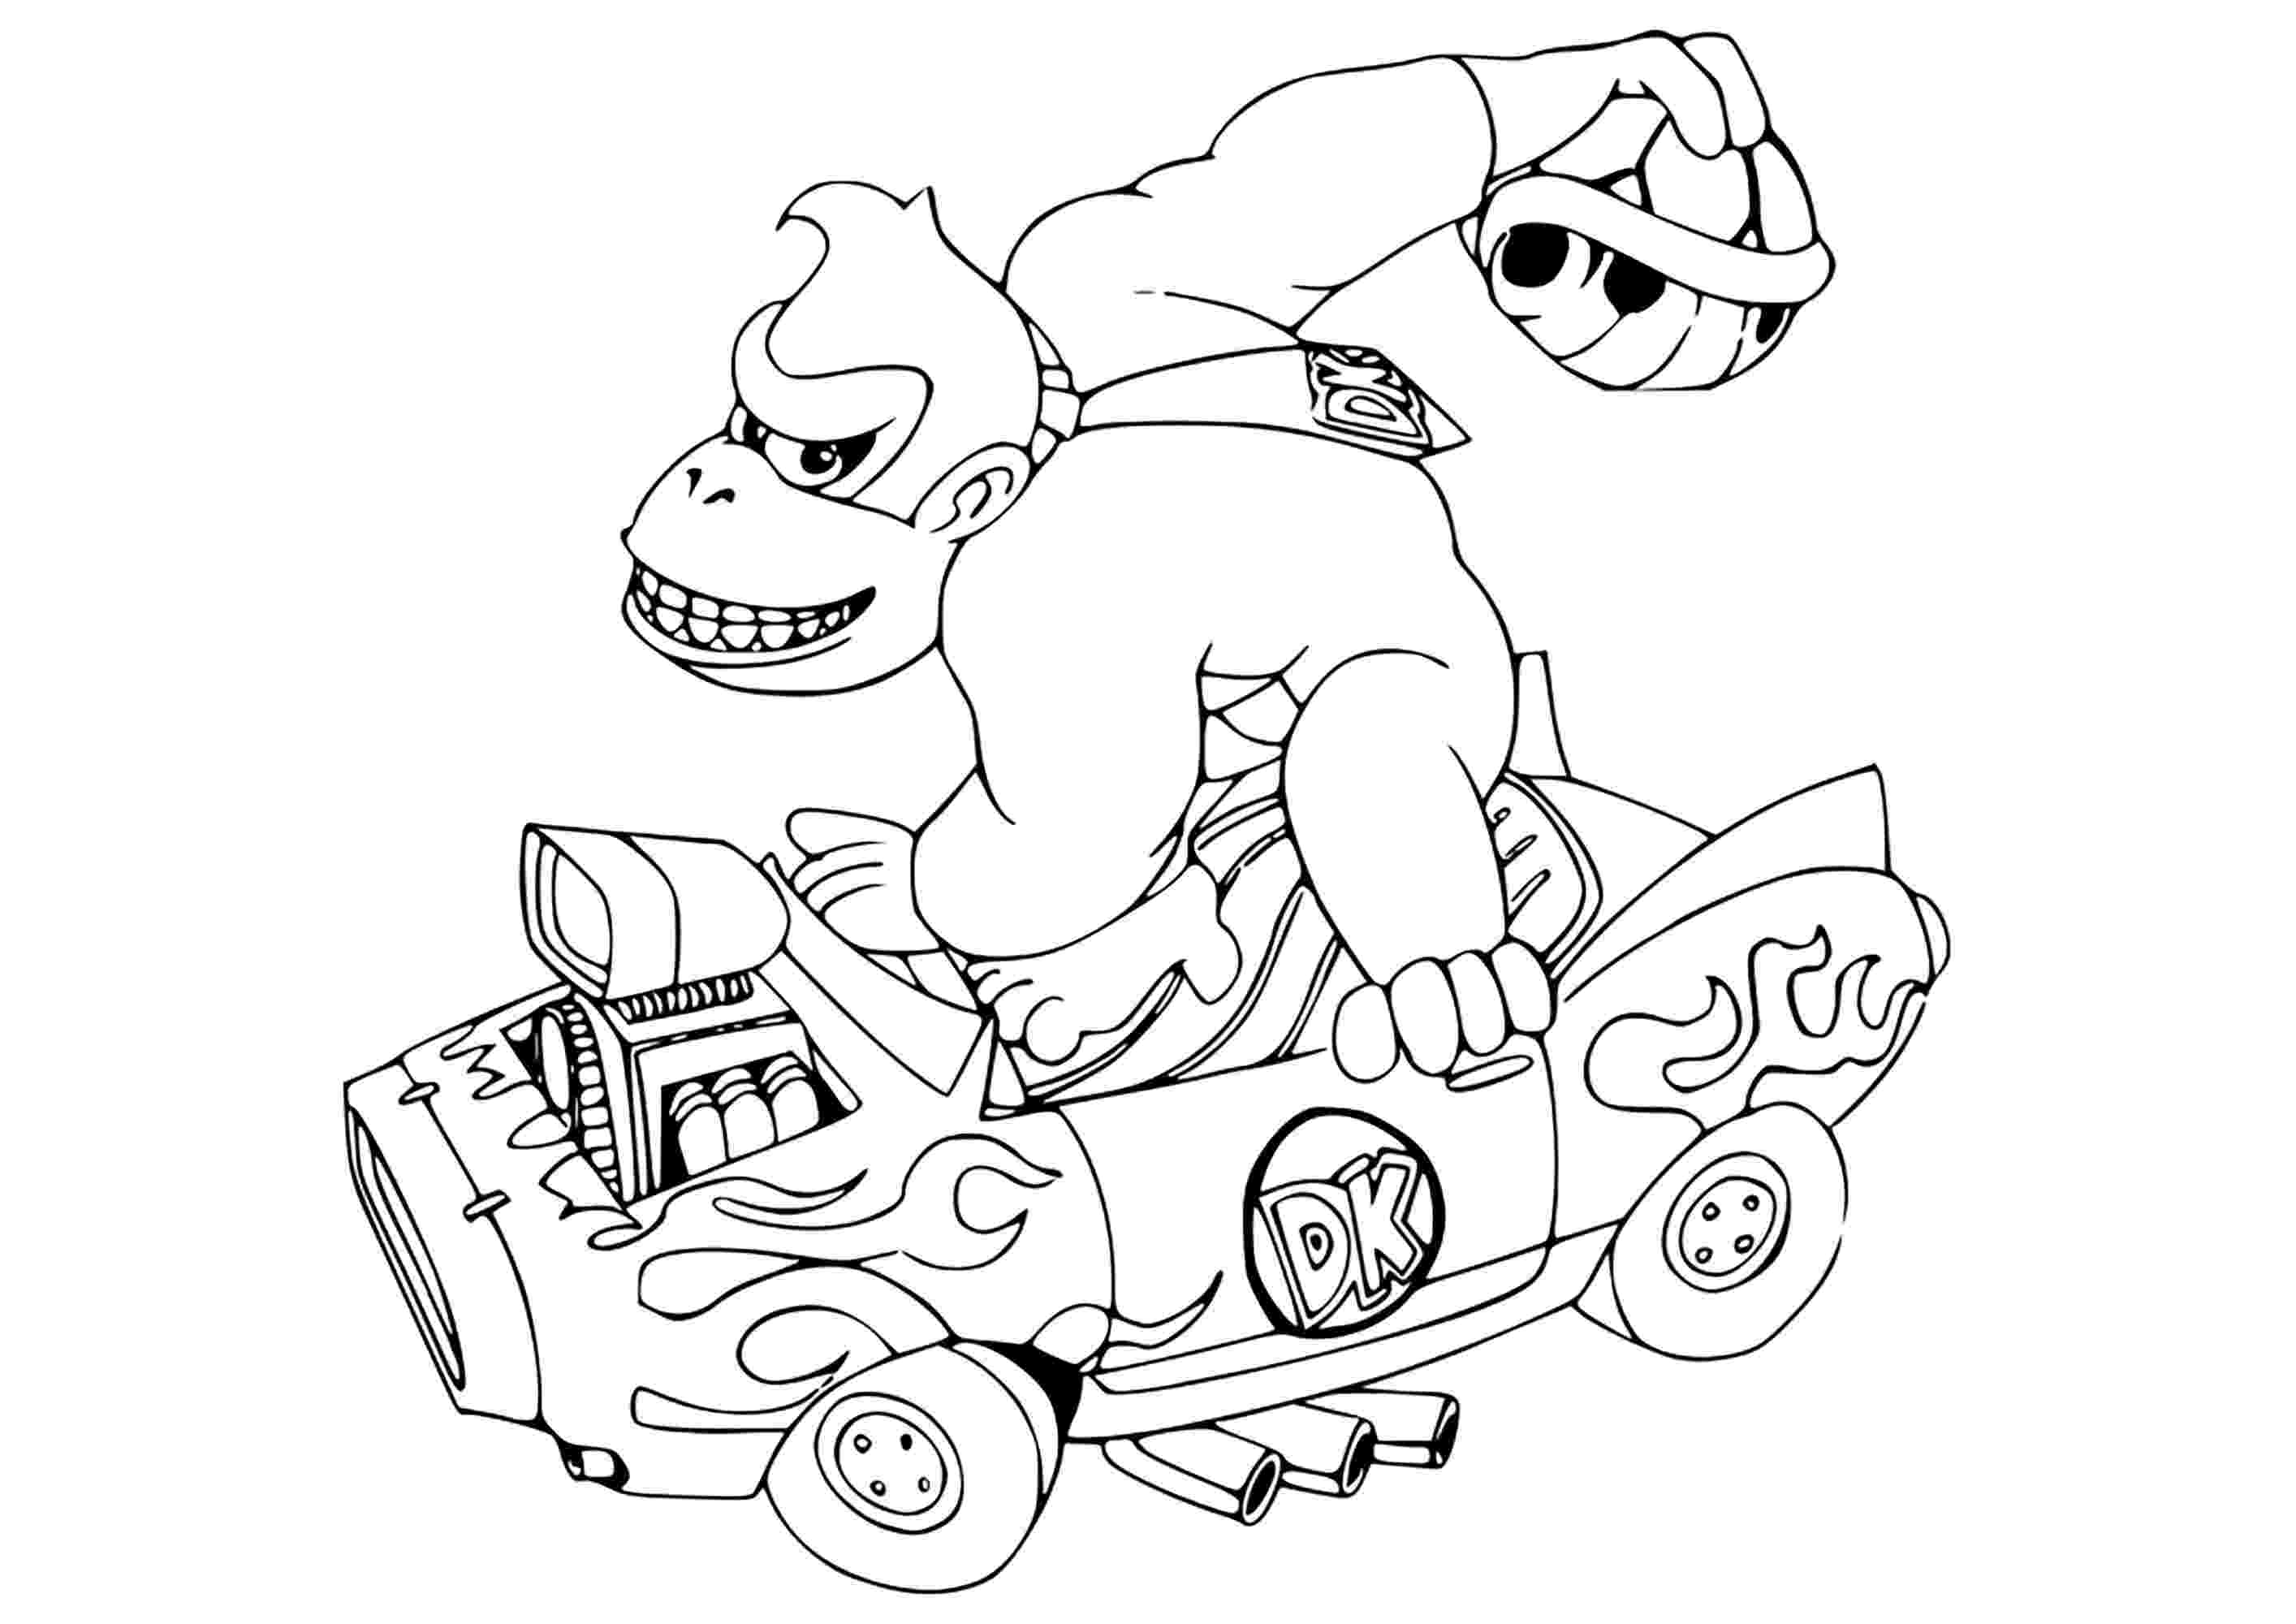 donkey kong coloring page donkey kong with barrel coloring page h m coloring pages kong donkey coloring page 